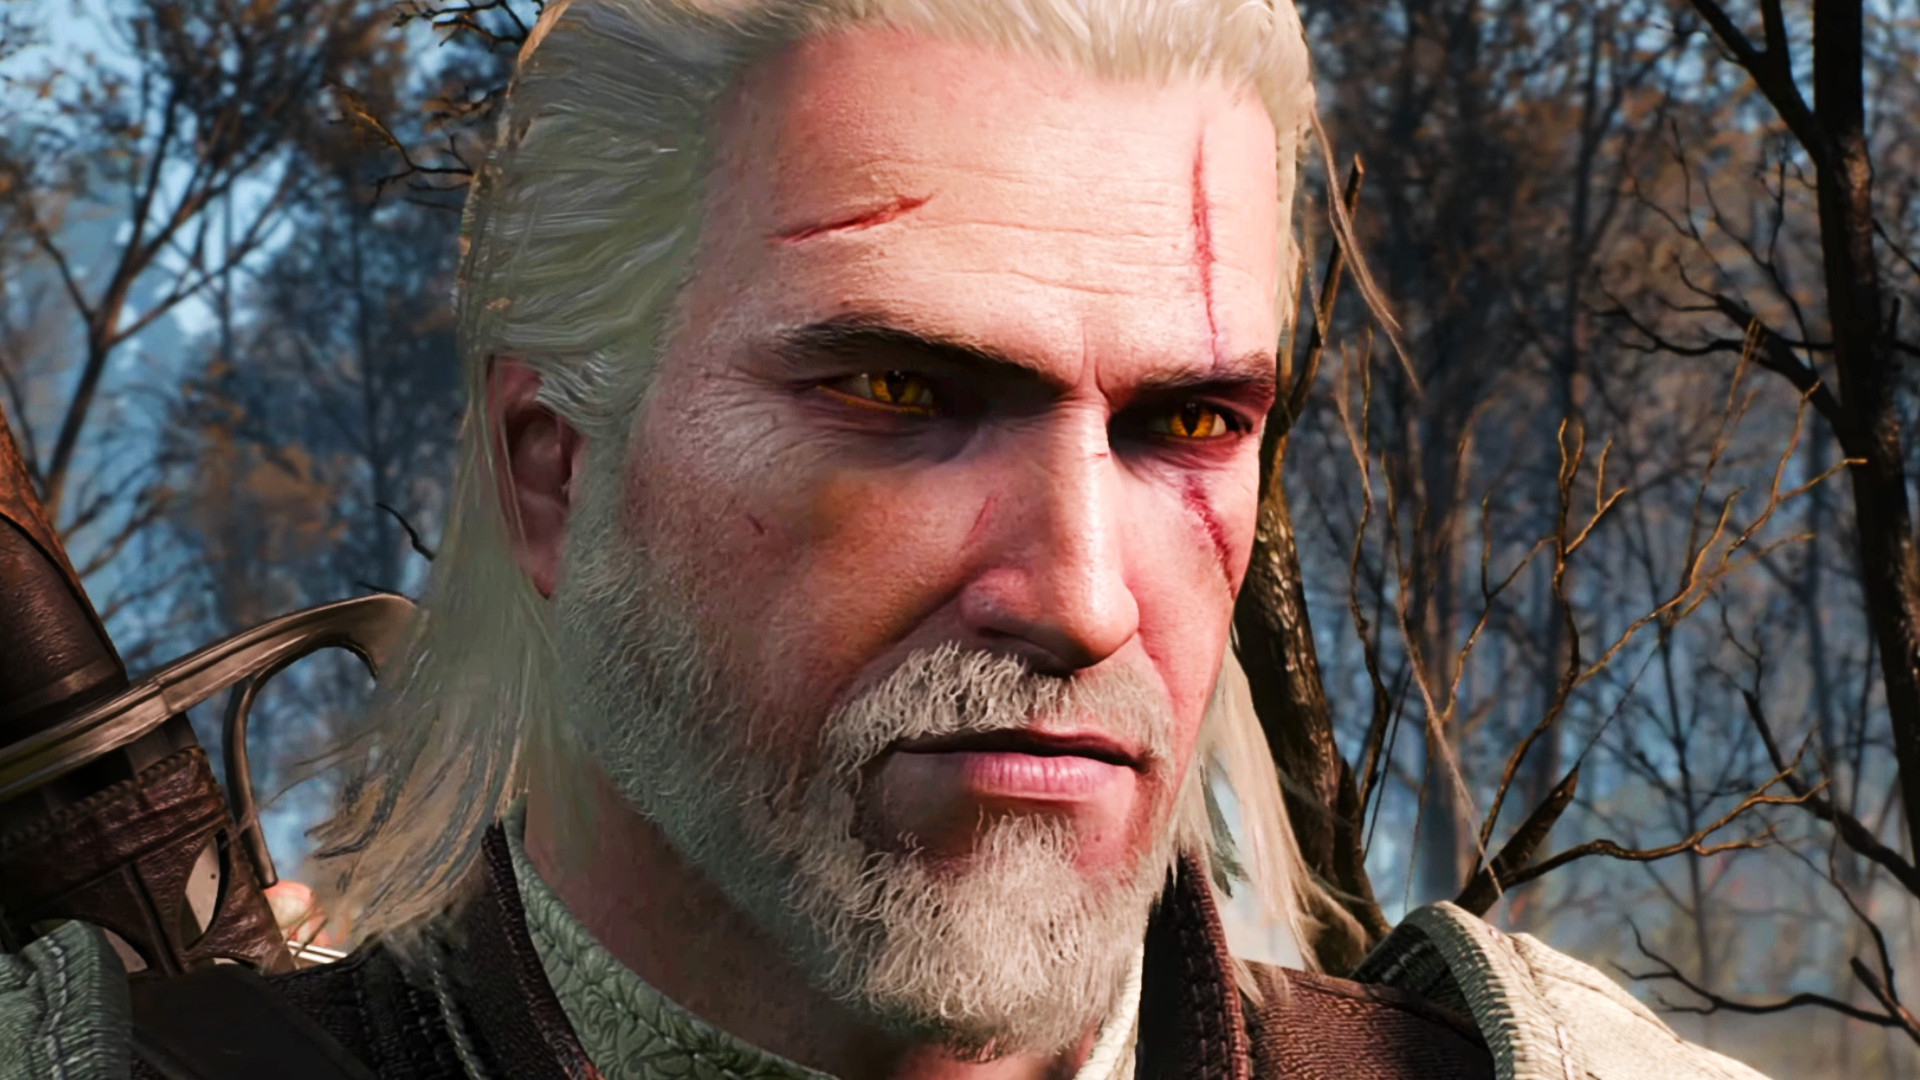 The Witcher spinoff is back in business, CDPR confirms